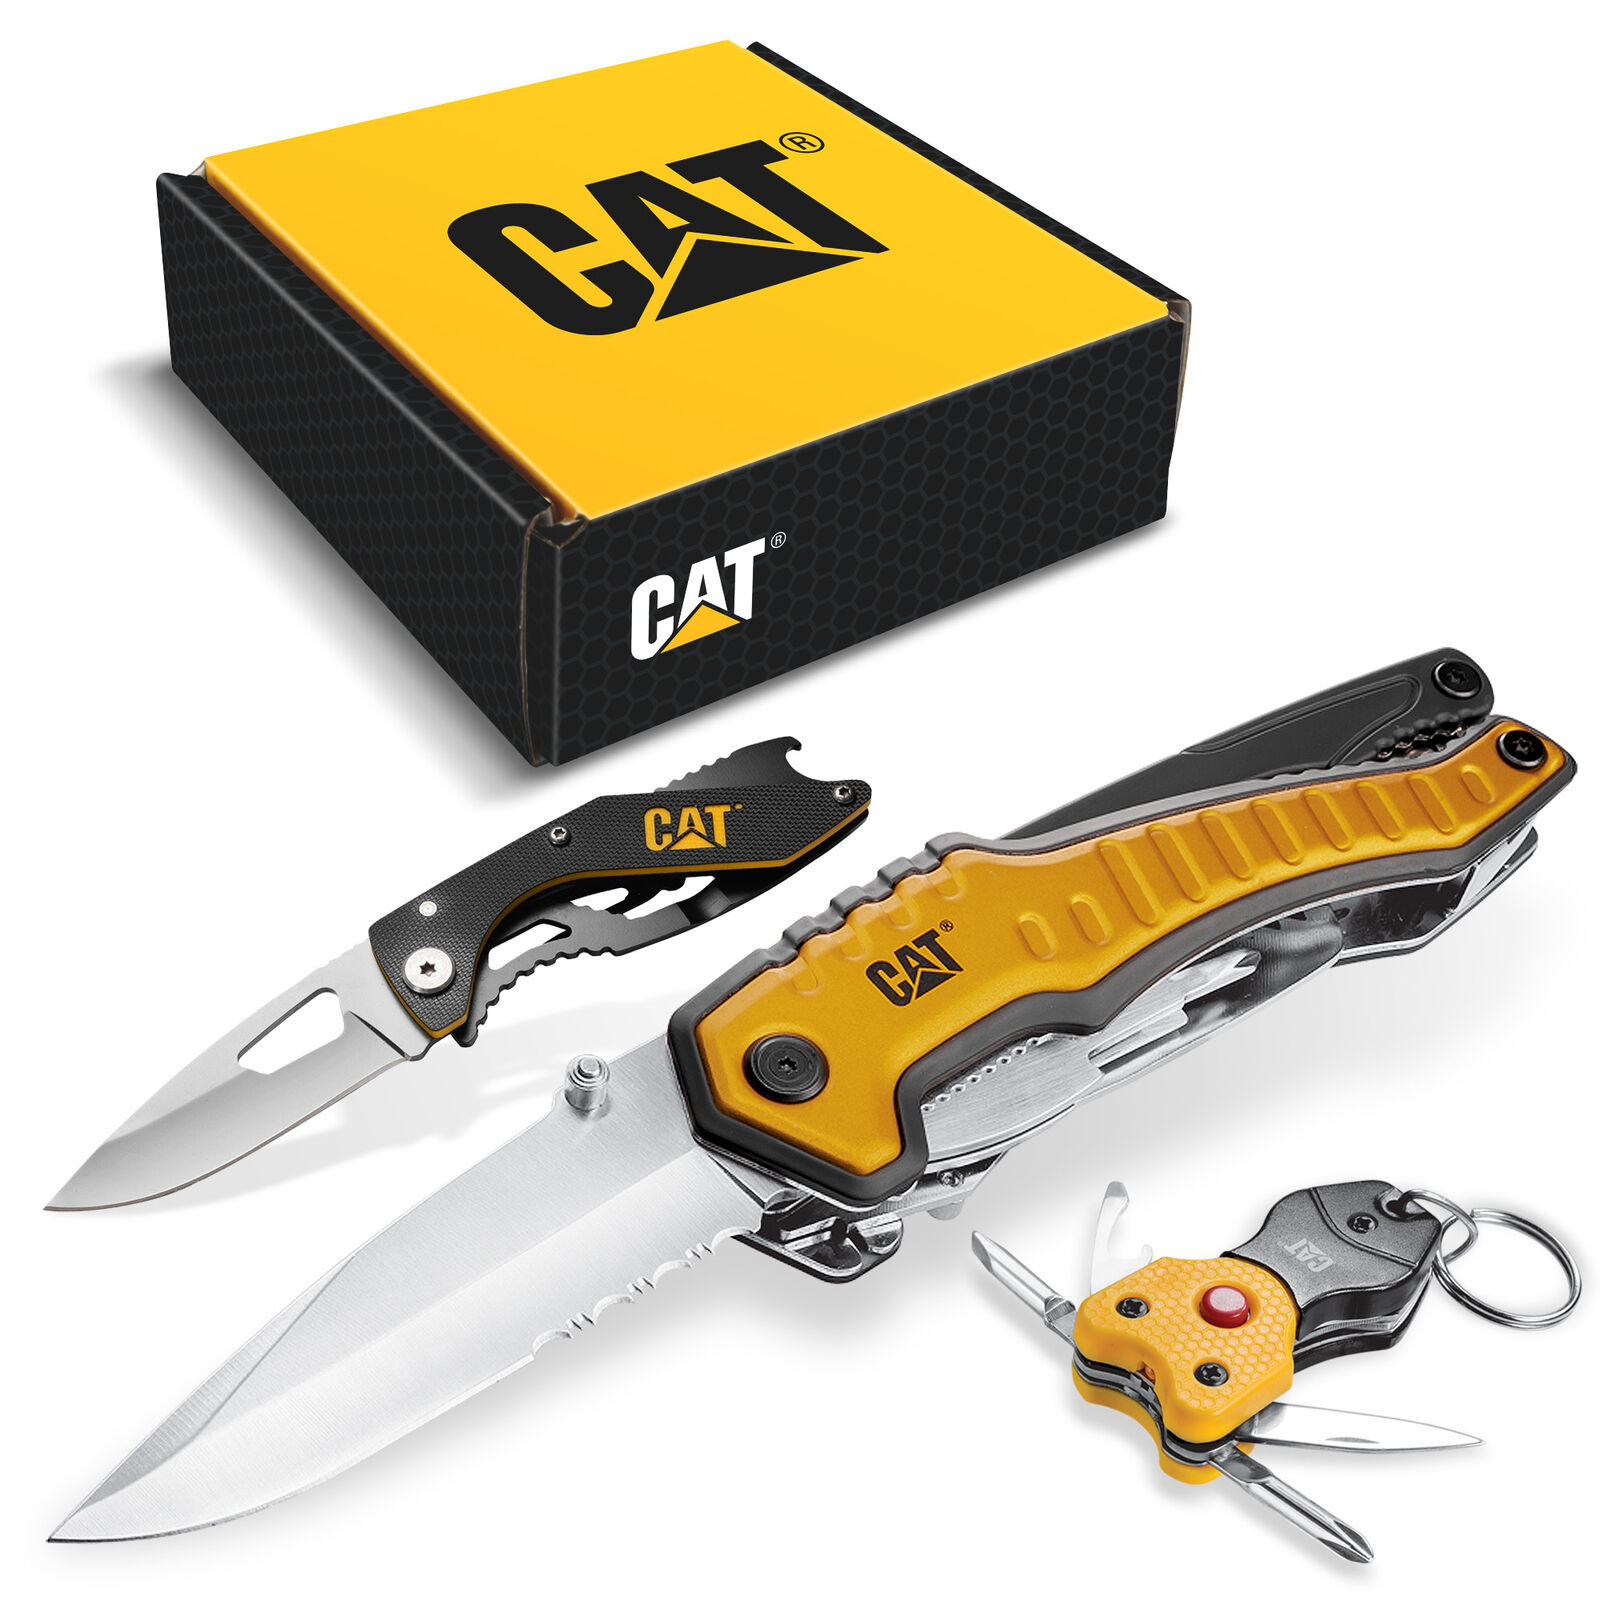 Cat Gift Box, 3 Piece 9-in-1 Multi-tool, Knife, And Multi-tool Key Chain -